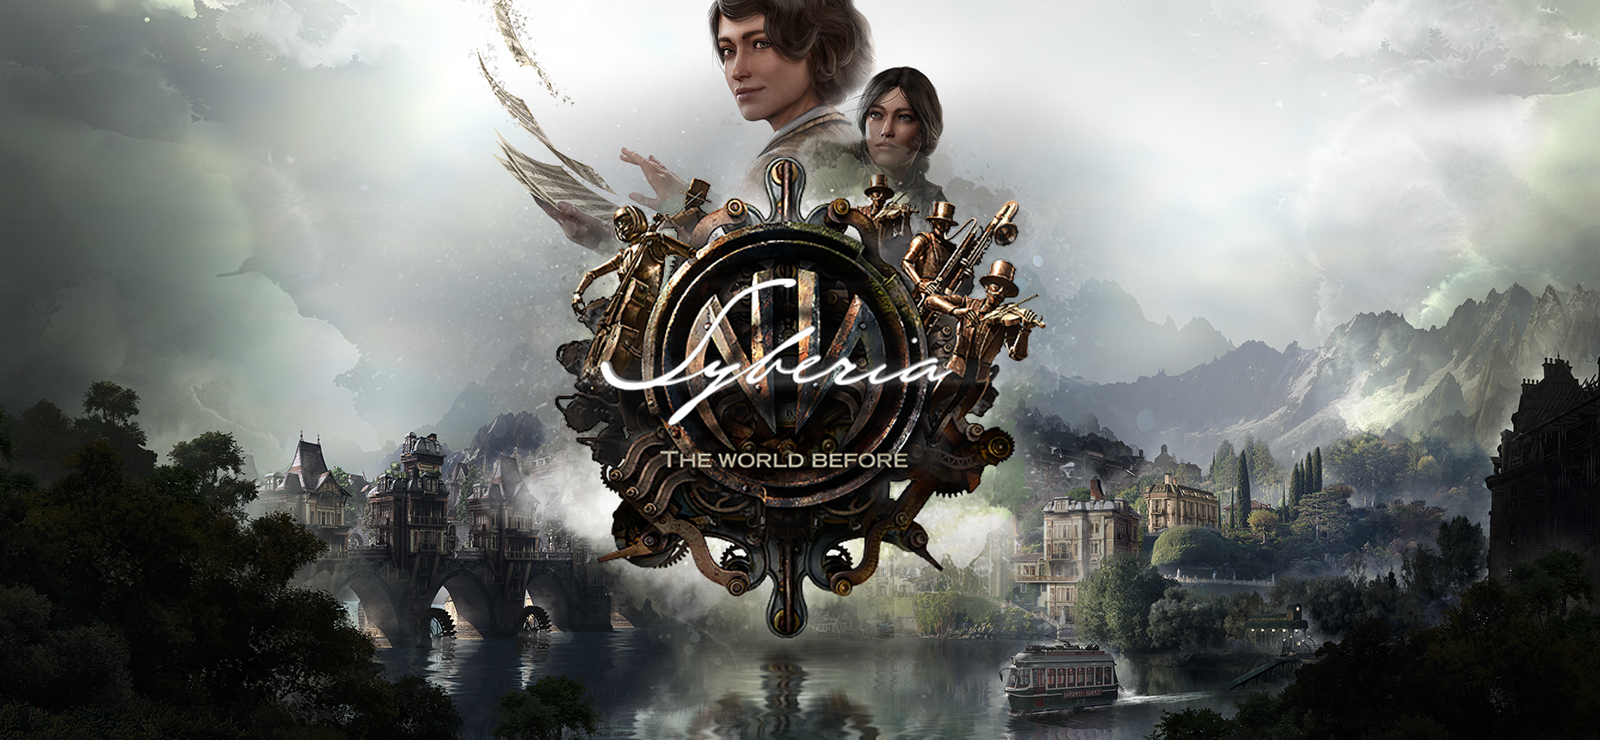 Syberia: The World Before - Digital Deluxe Edition